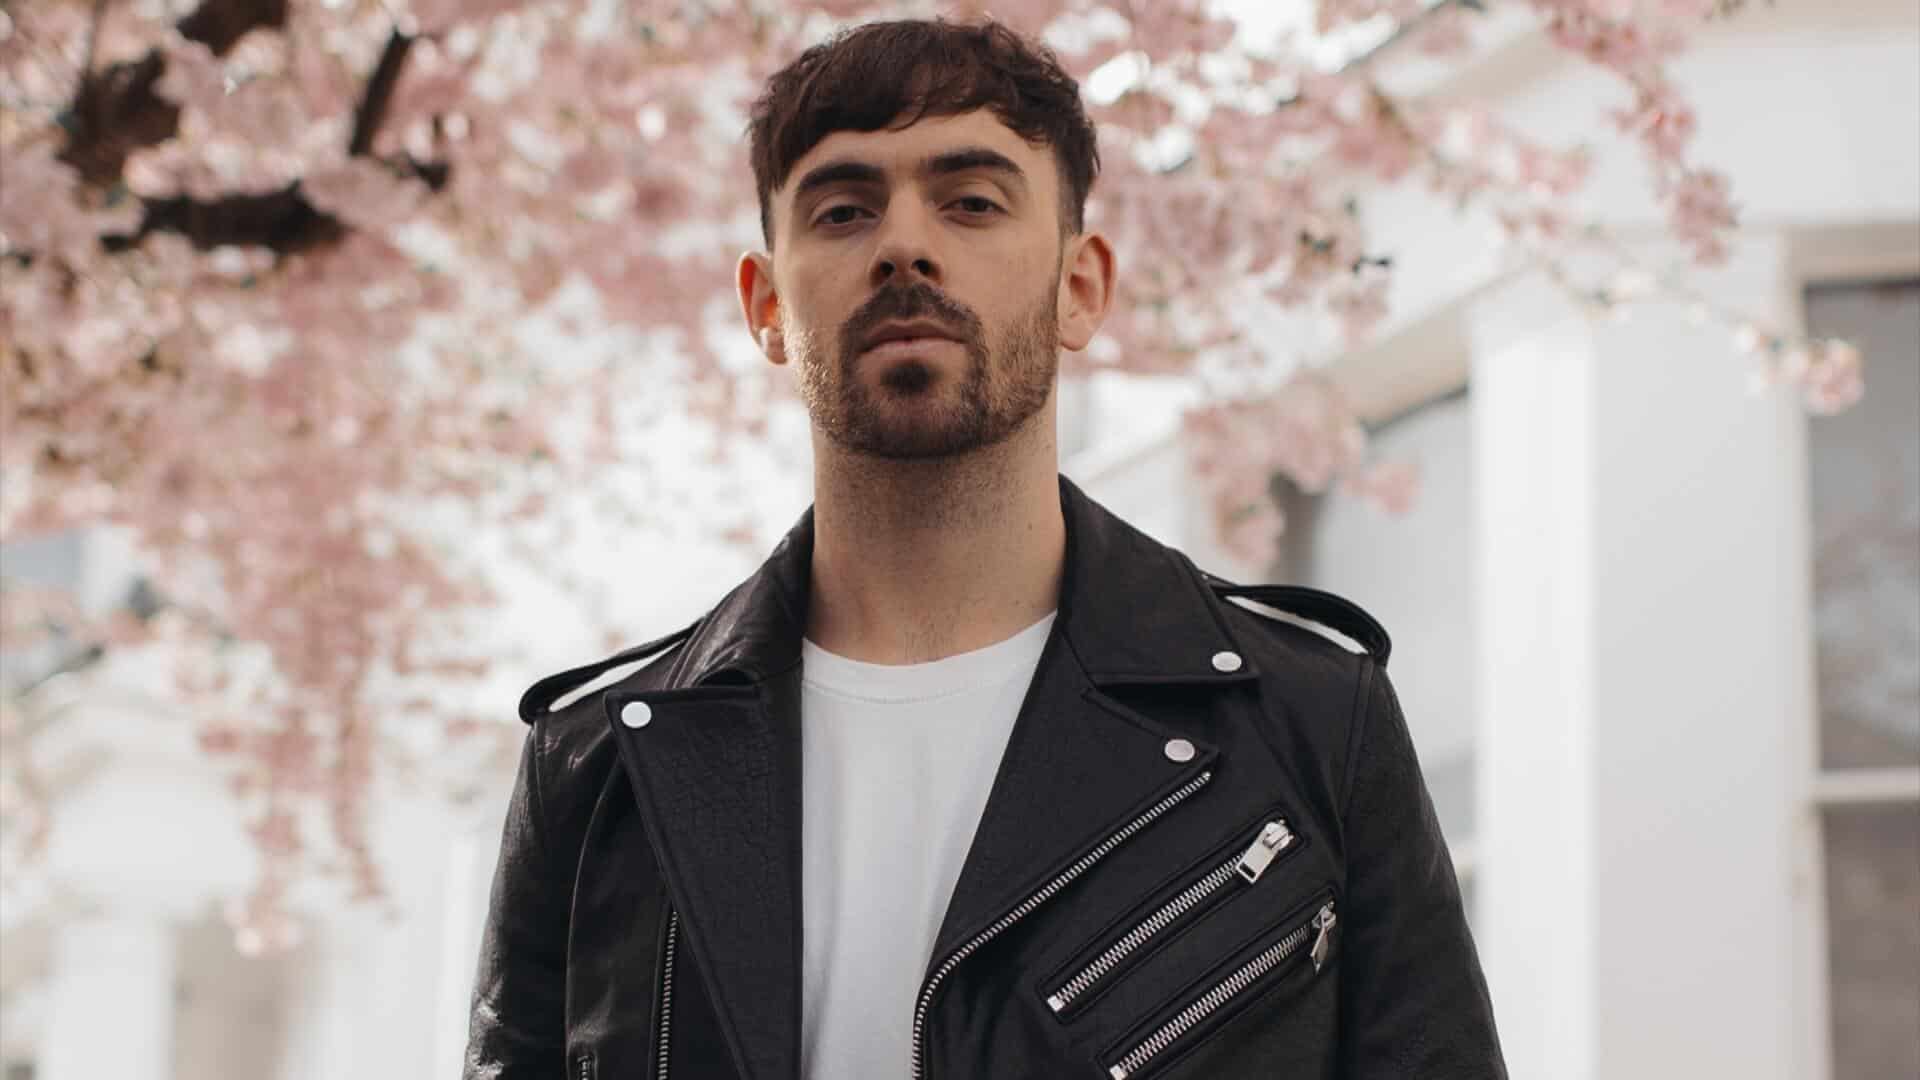 Patrick Topping drops fresh single ‘New Reality’ on his TRICK imprint: Listen